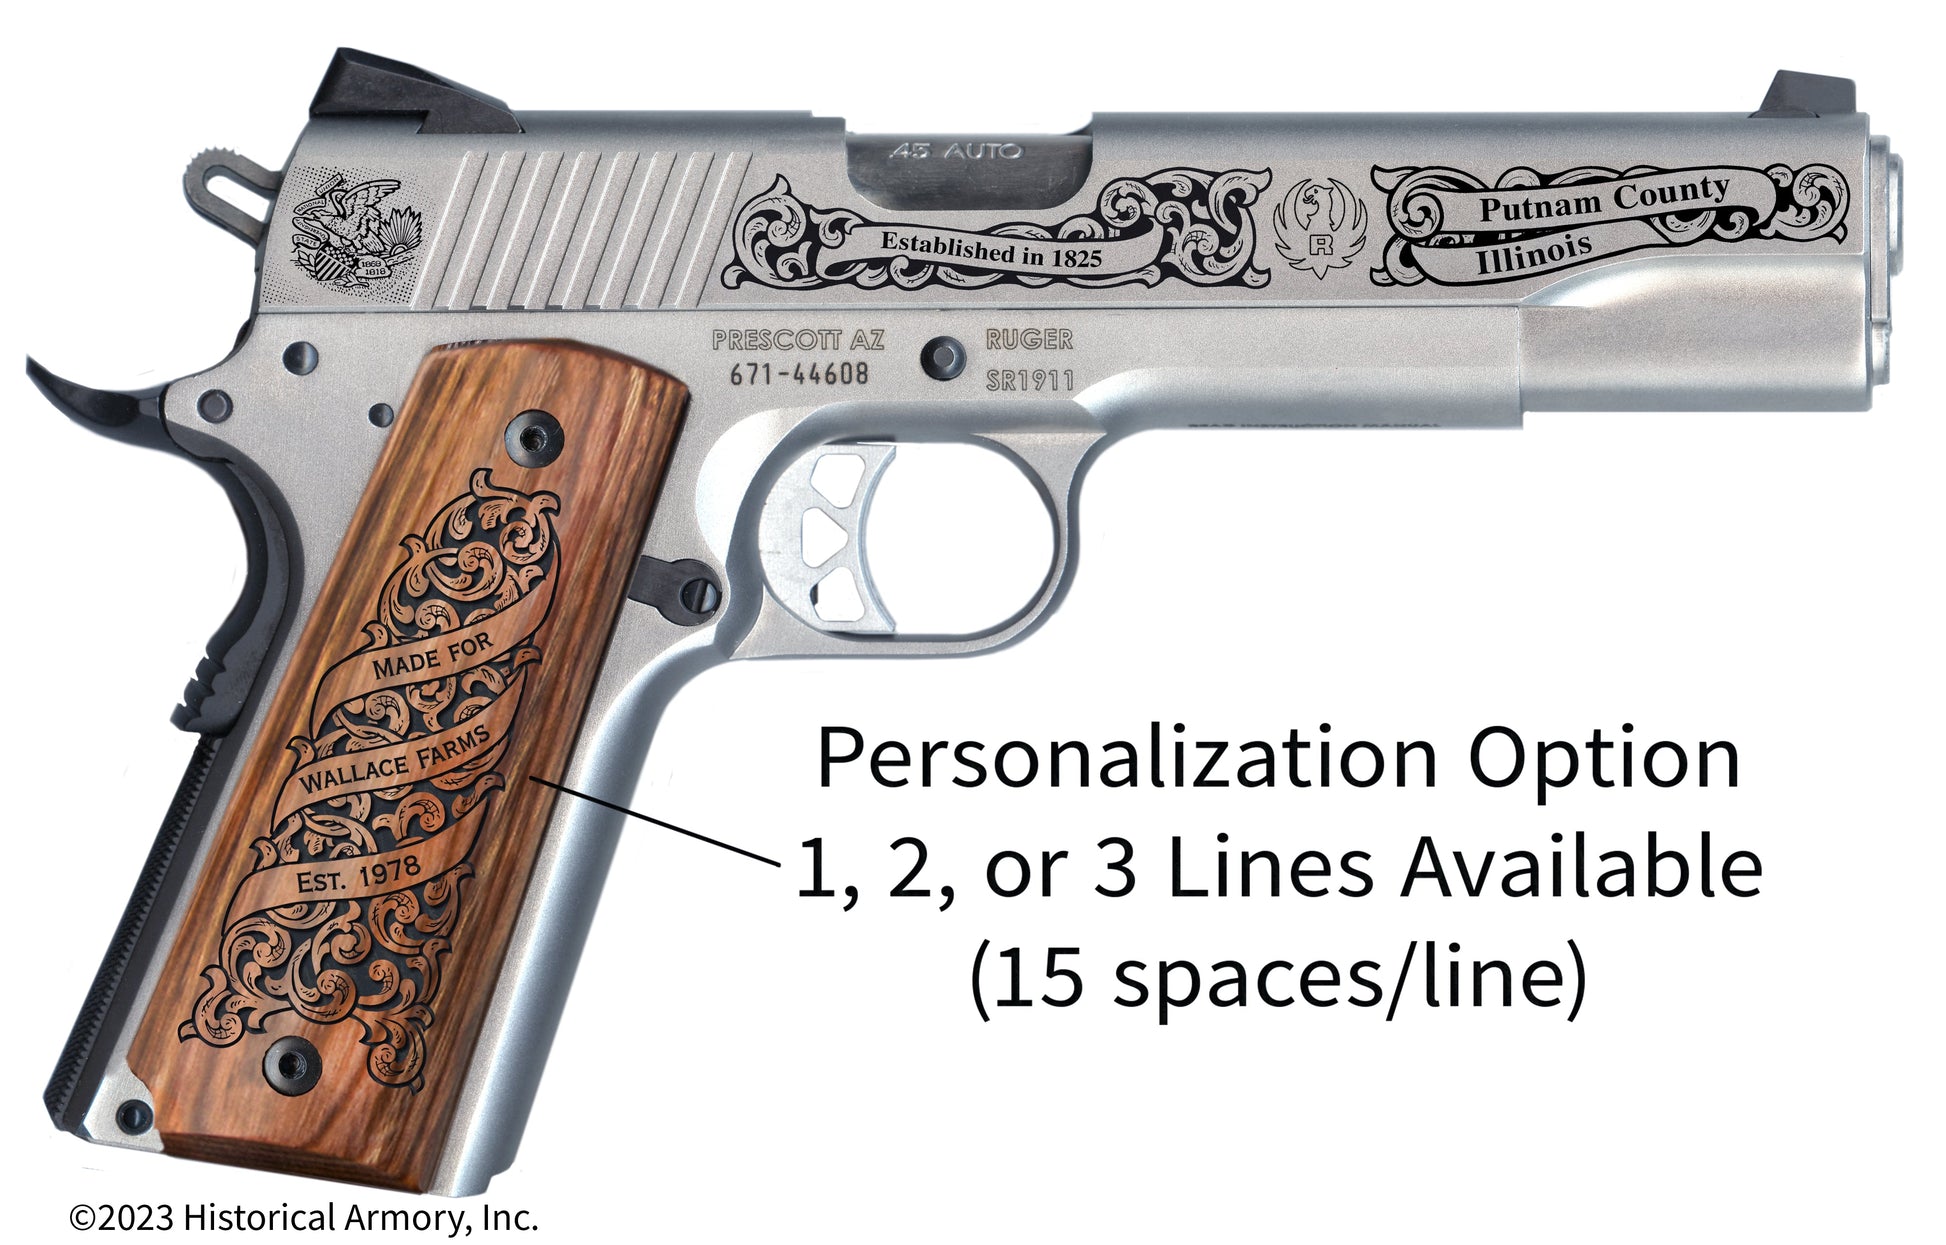 Putnam County Illinois Personalized Engraved .45 Auto Ruger 1911